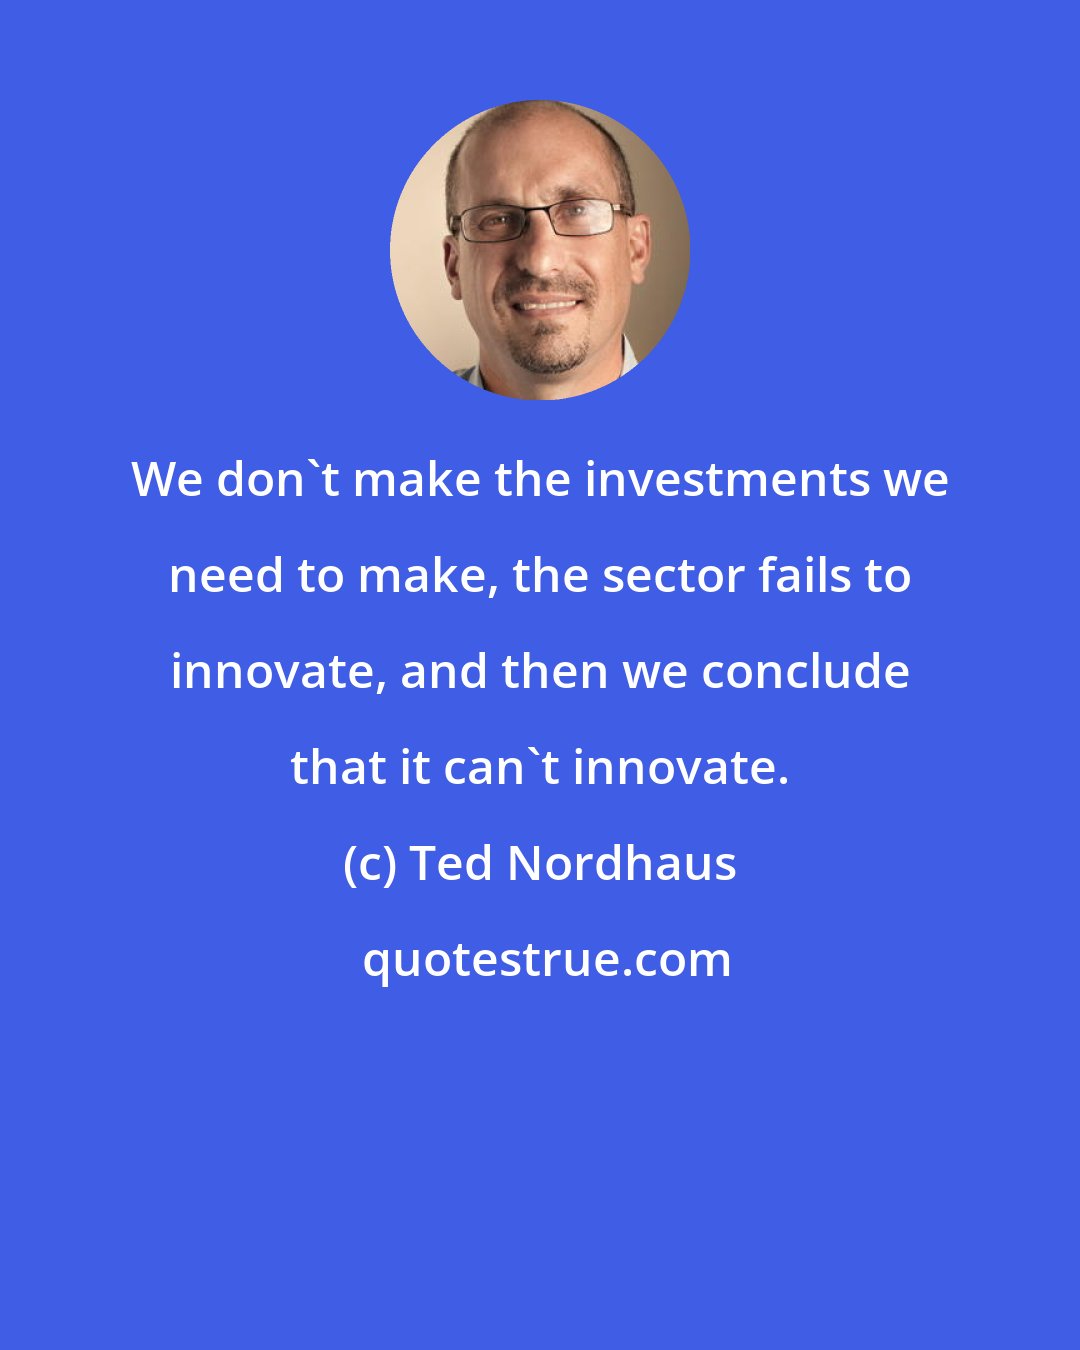 Ted Nordhaus: We don't make the investments we need to make, the sector fails to innovate, and then we conclude that it can't innovate.